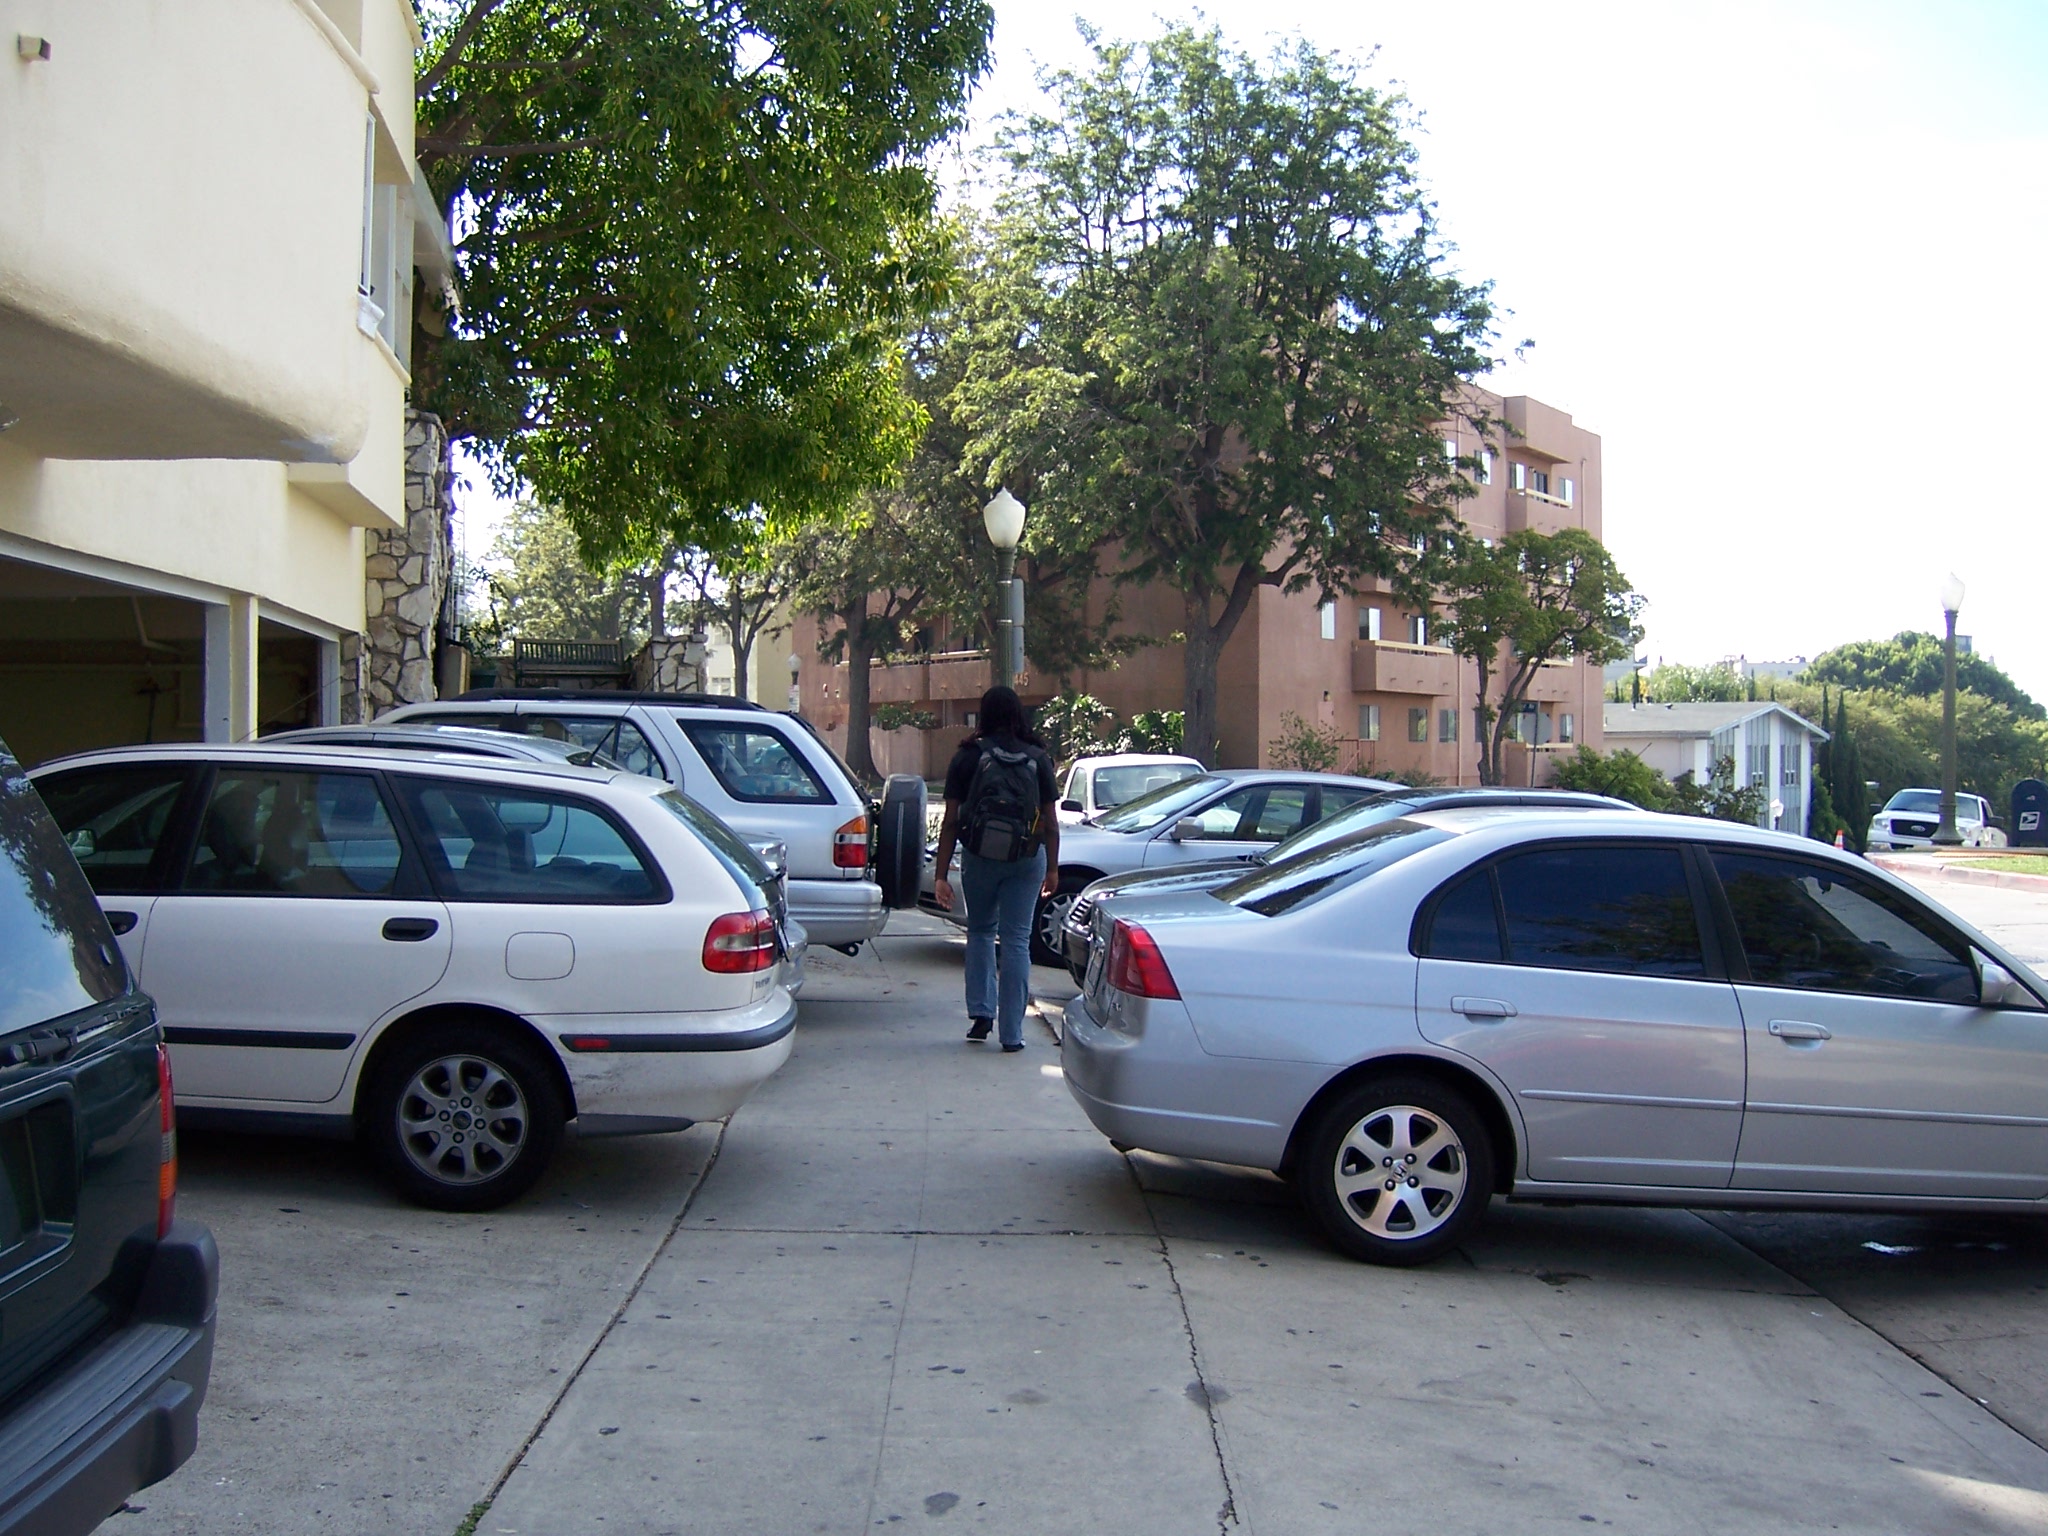 Parking on sidewalks has become a sanctioned practice in Westwood Village. Photo: Donald Shoup